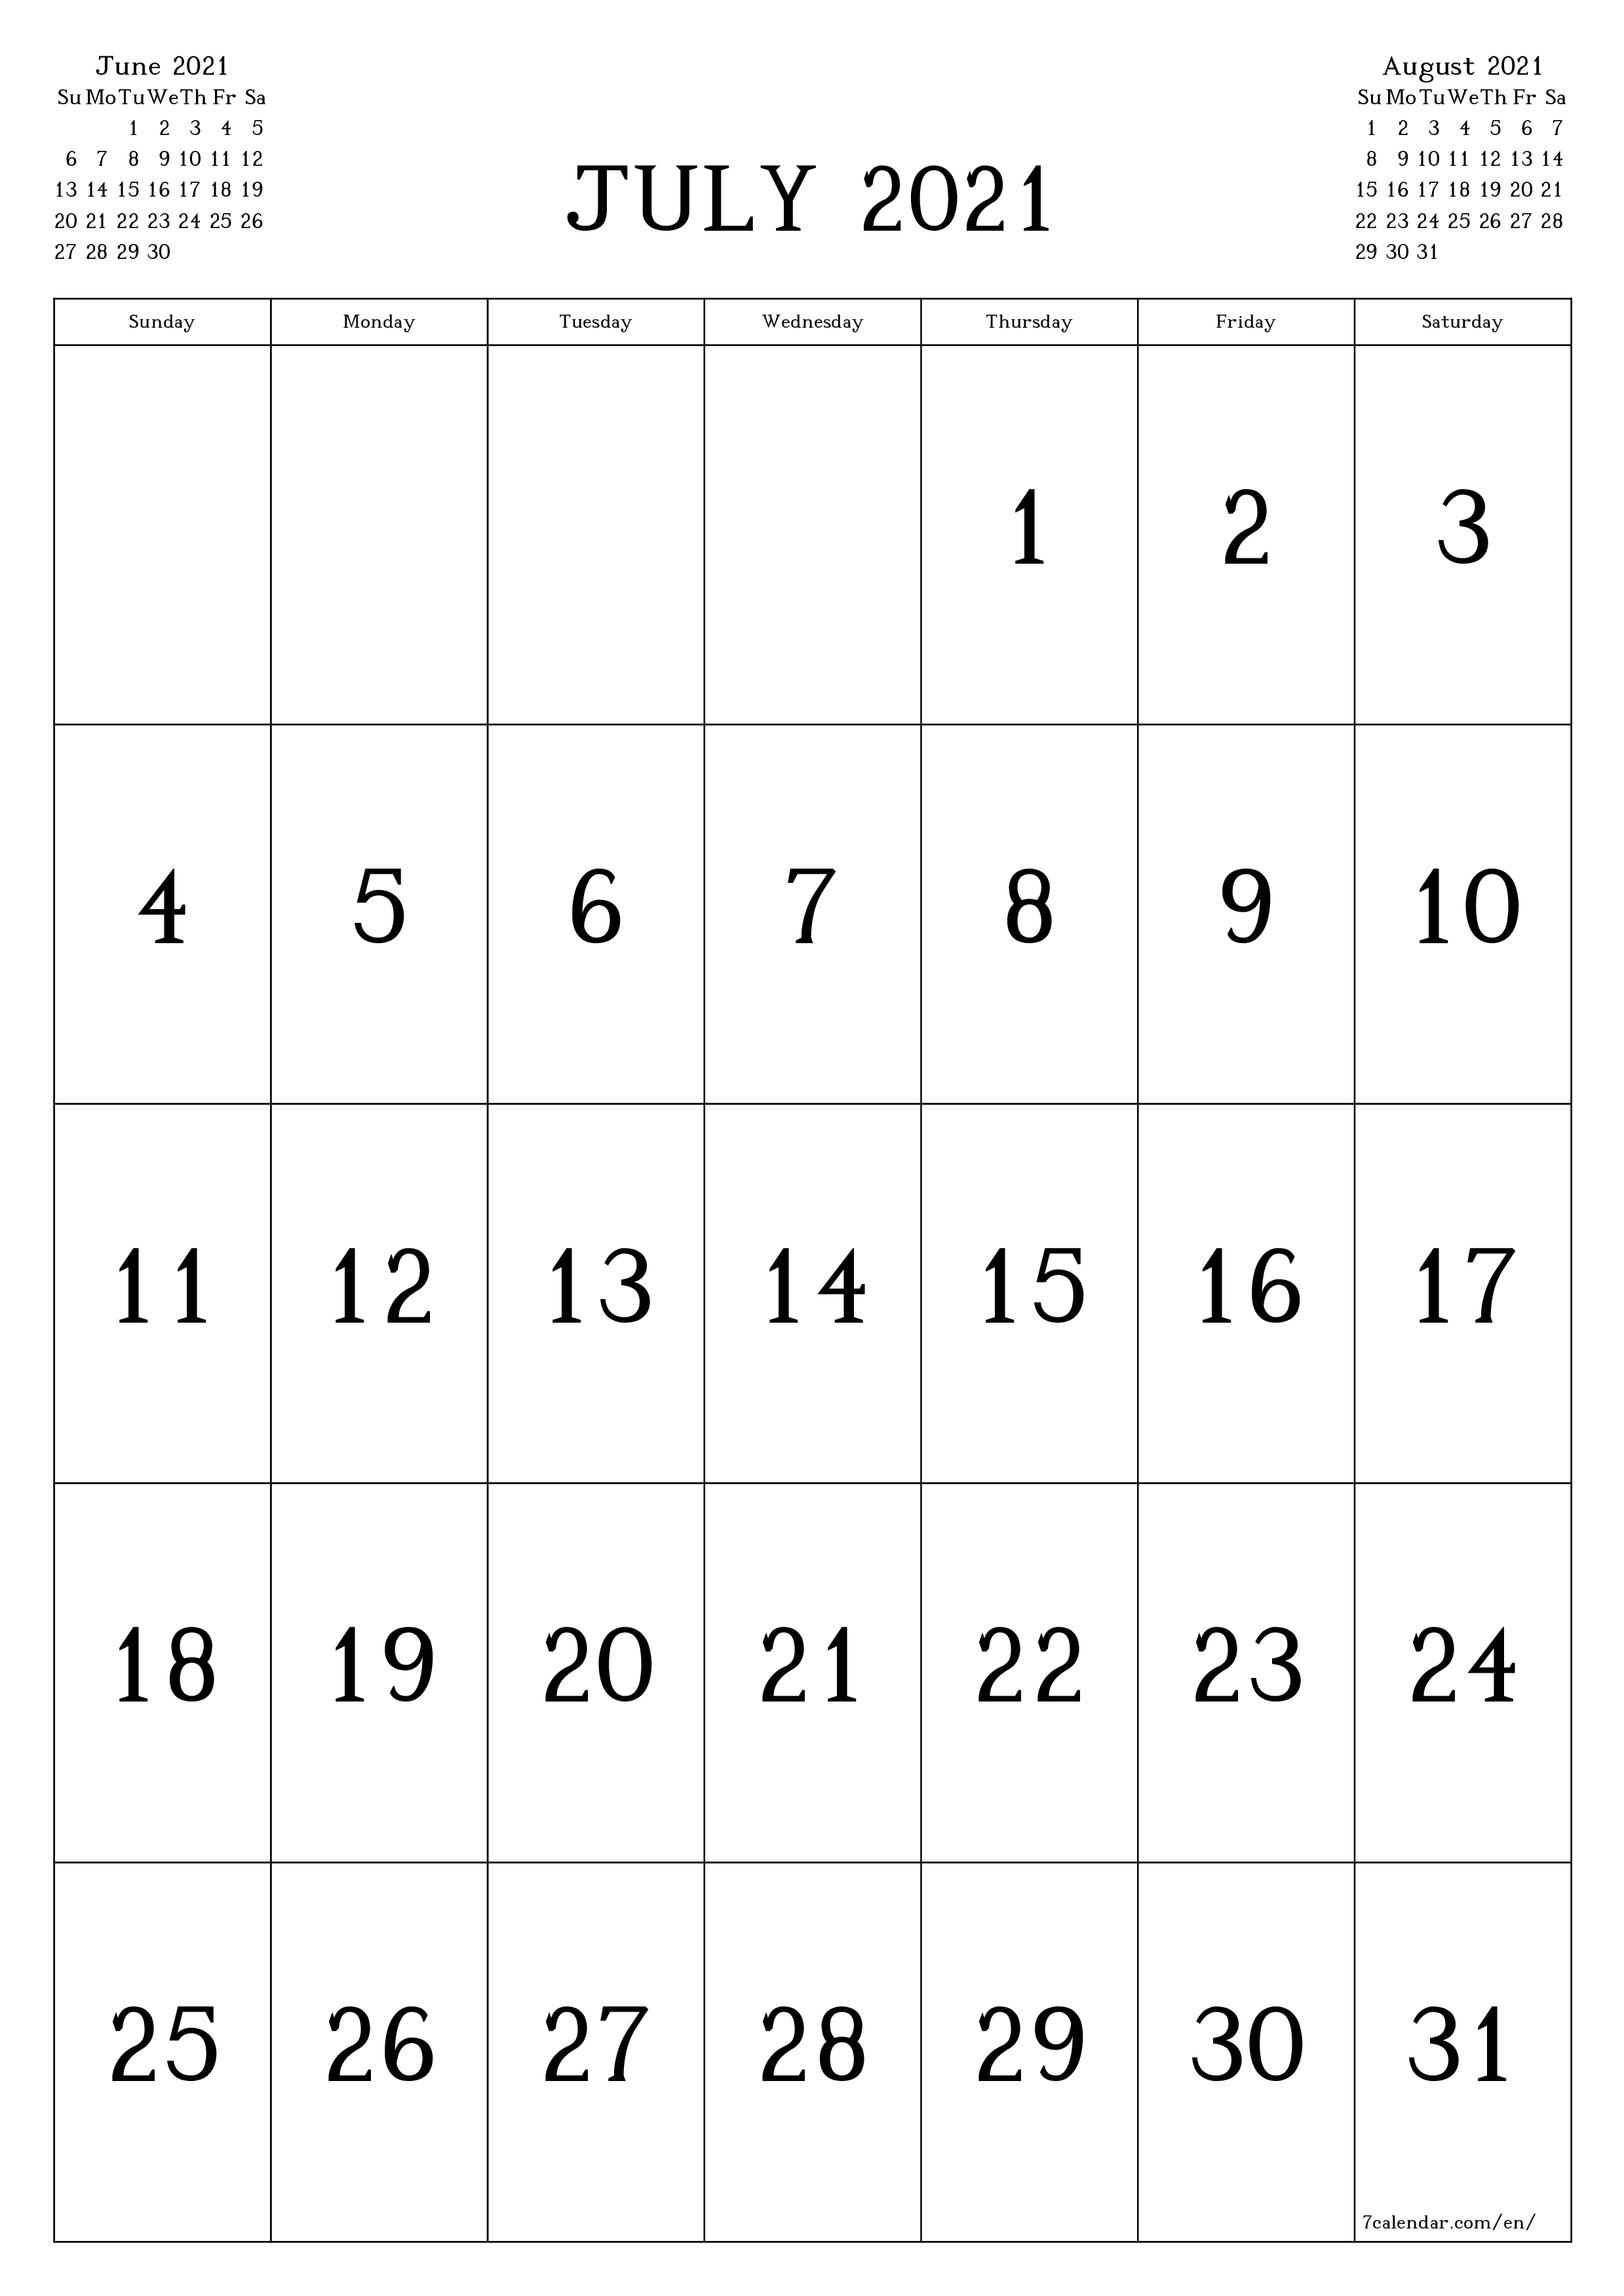 Blank monthly dated HD template image of calendar for month July 2021 save and print to PDF PNG English - 7calendar.com